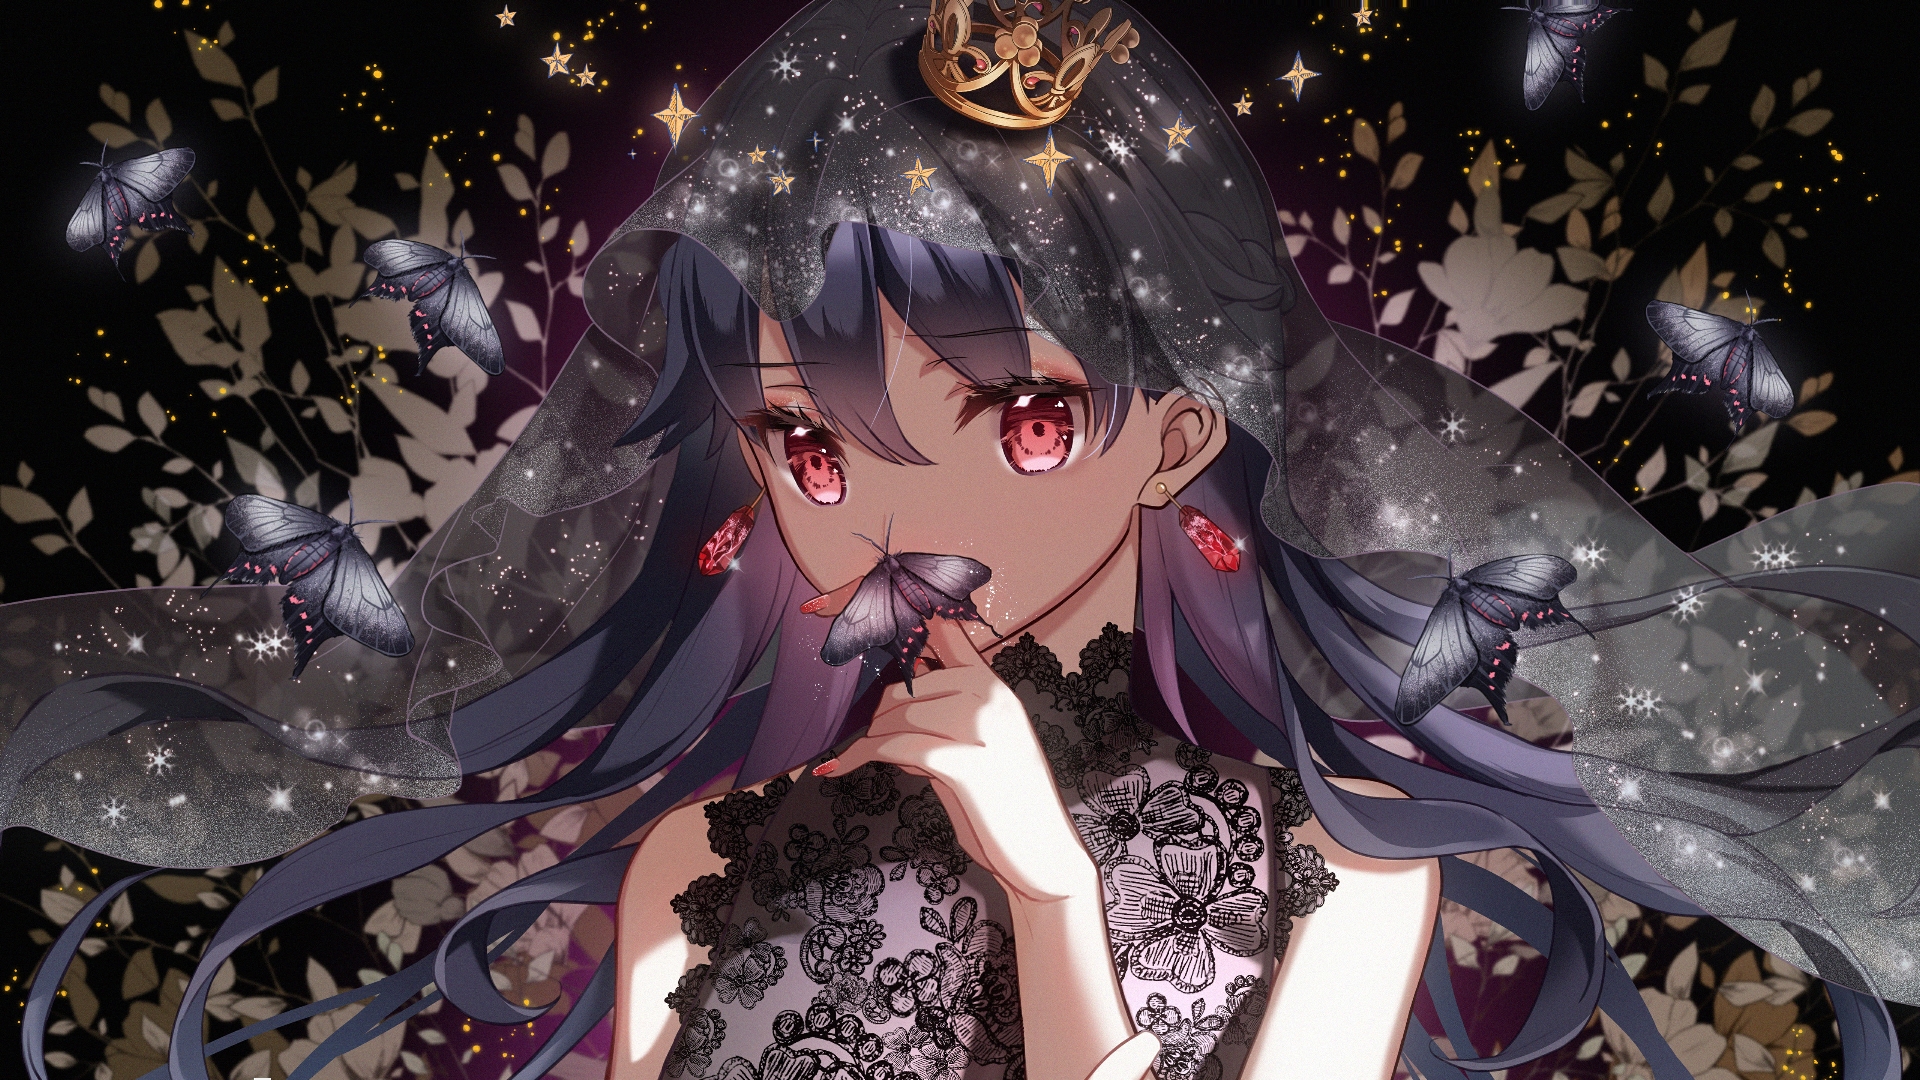 Anime 1920x1080 anime anime girls butterfly red eyes earring crown dark hair long hair stars red nails long nails dress plants insect artwork Ktmzlsy